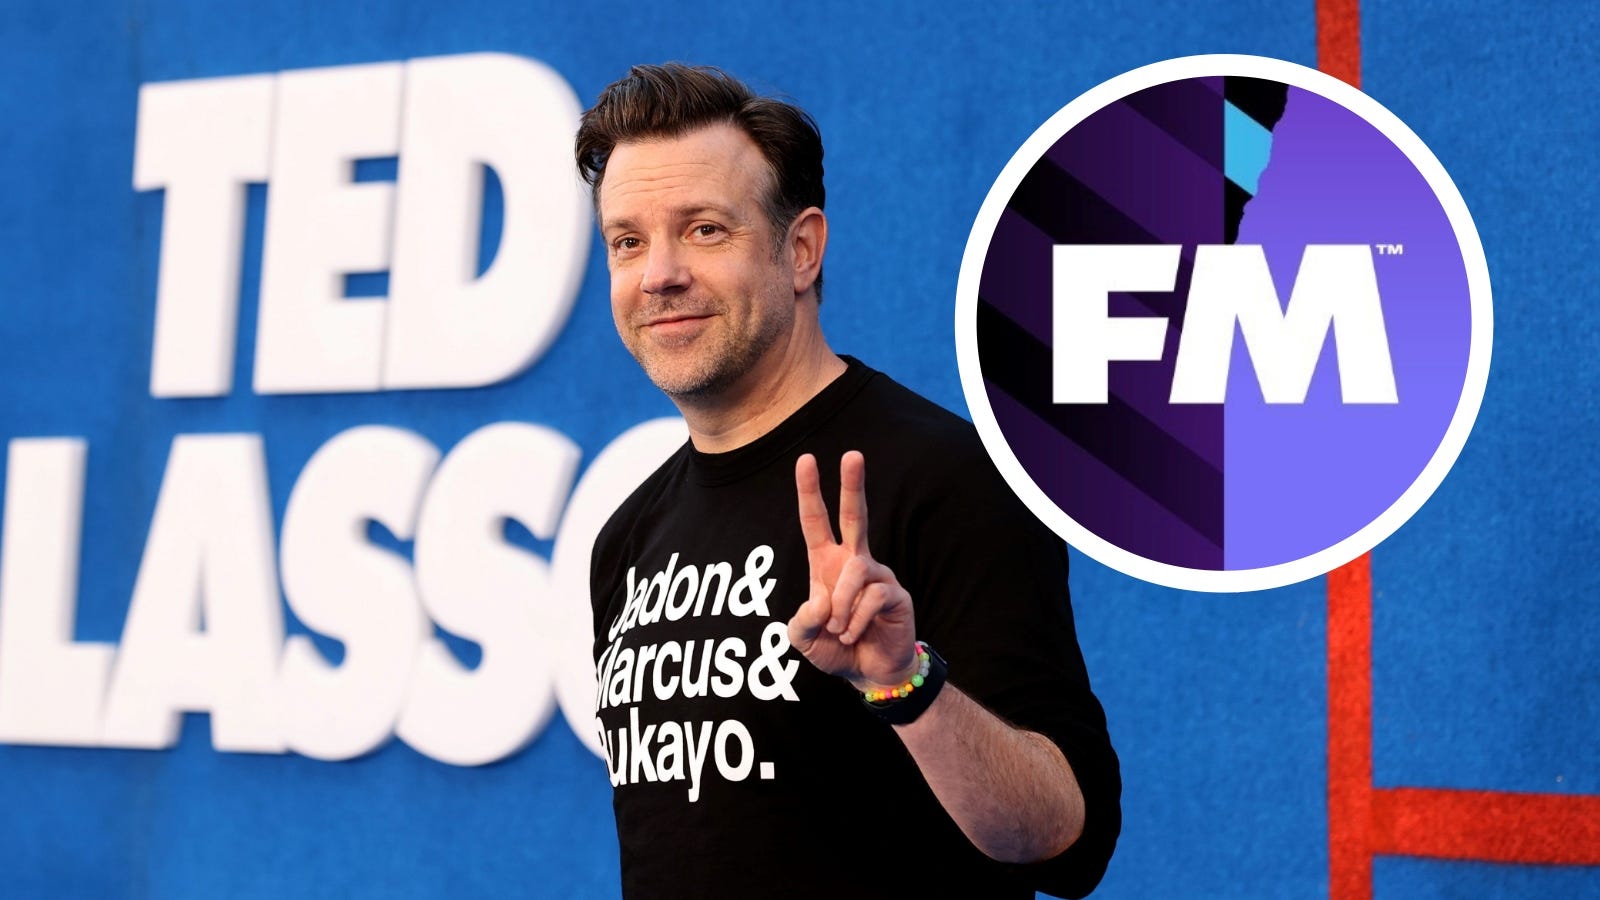 Jason Sudeikis standing next to Ted Lasso logo with Football Manager logo